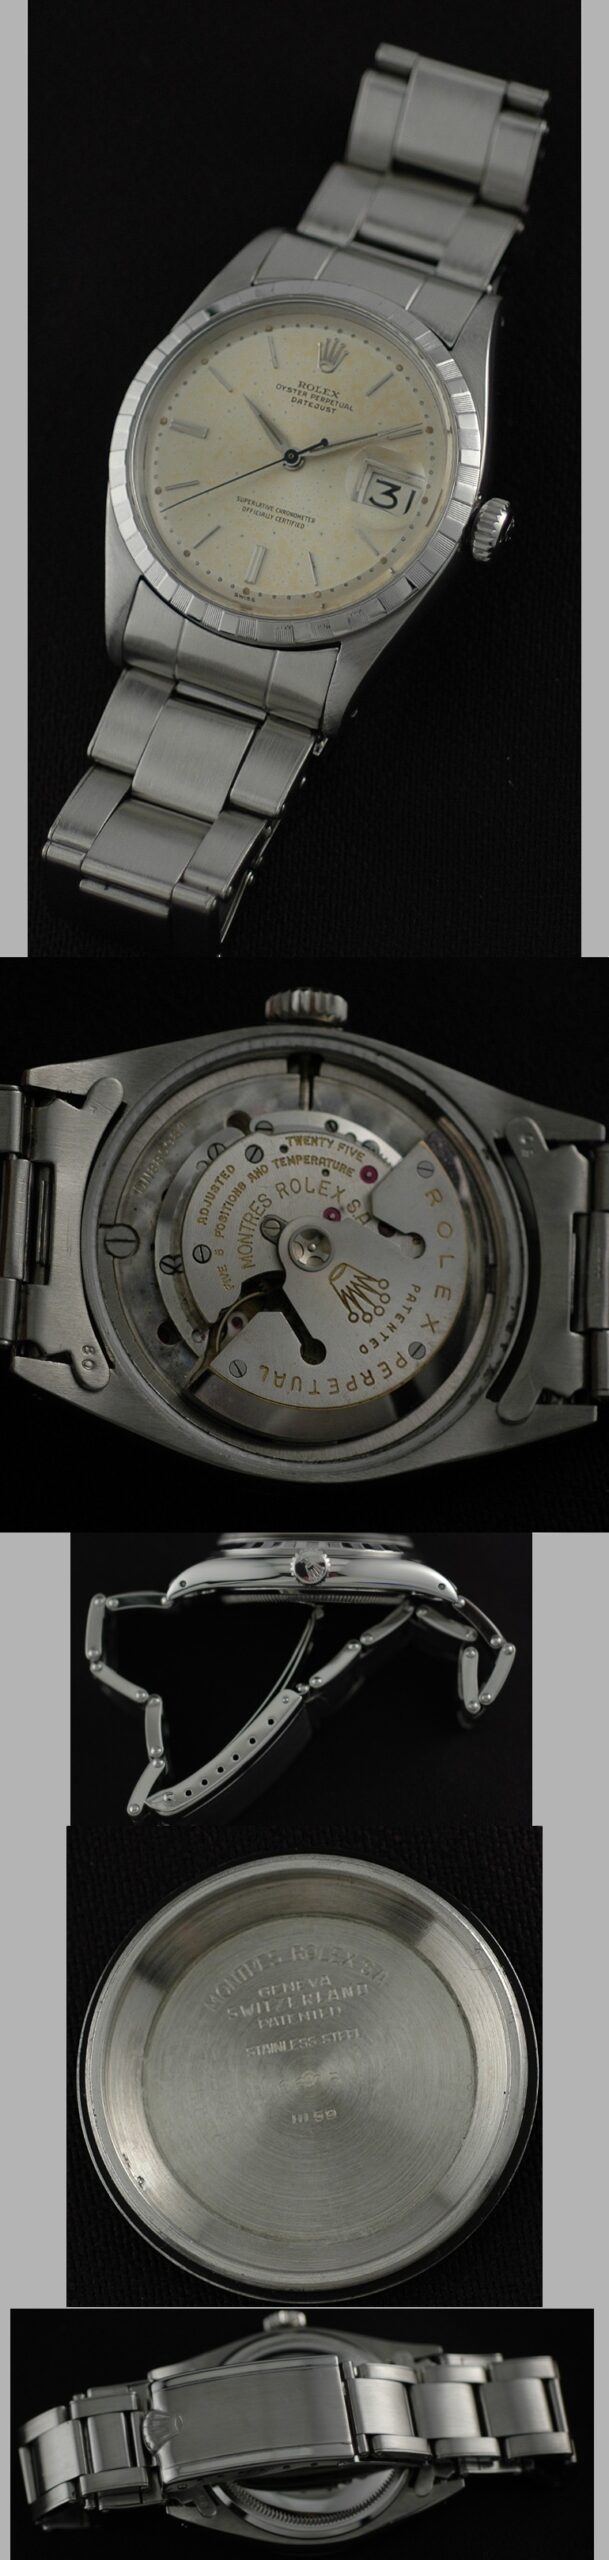 1959 Rolex Oyster Perpetual Datejust stainless steel watch with original crenelated bezel, riveted bracelet, and caliber 1066 movement.